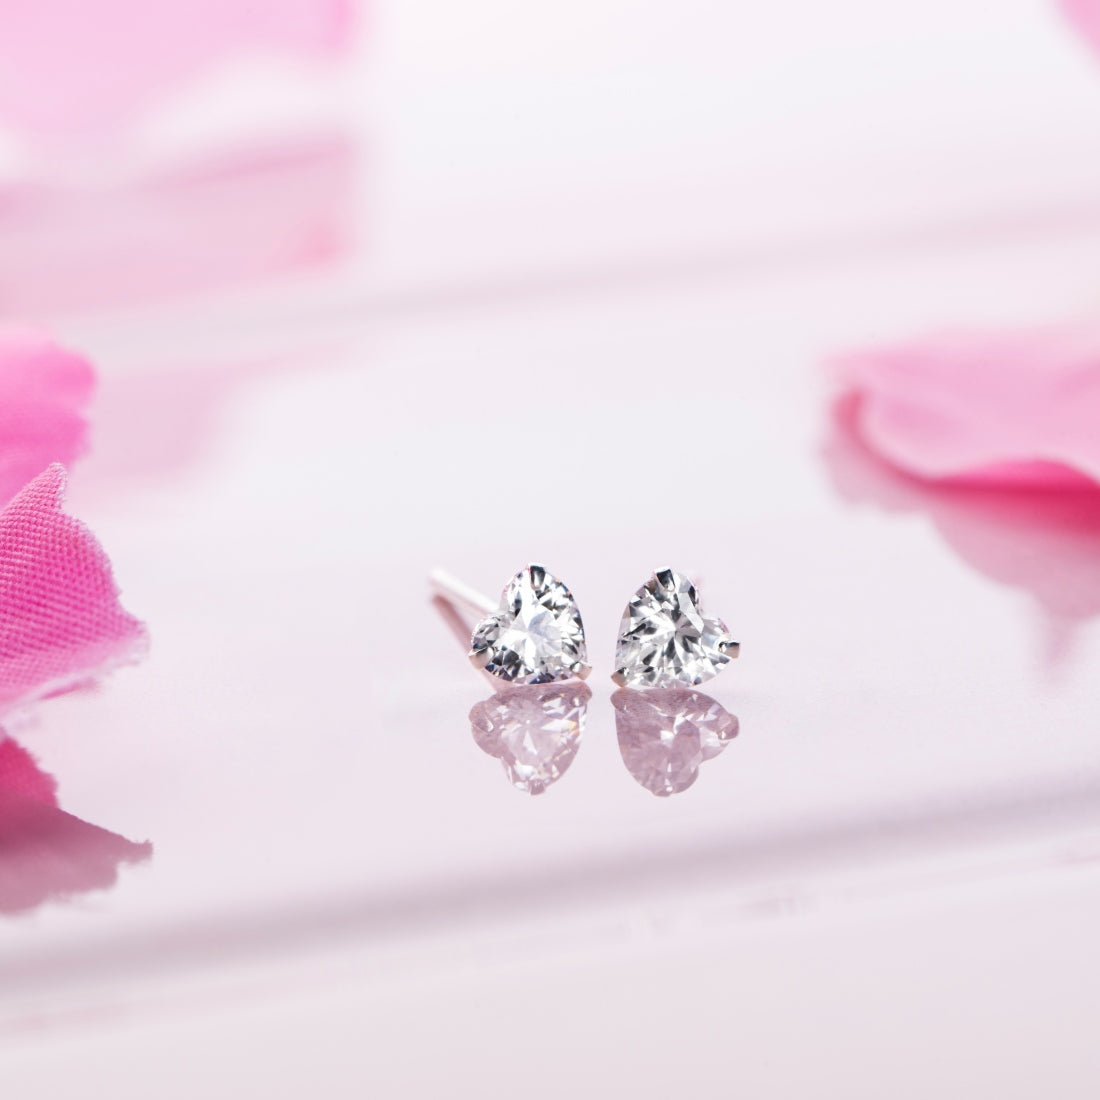 Tiny Heart Solitaire 925 Silver Earrings